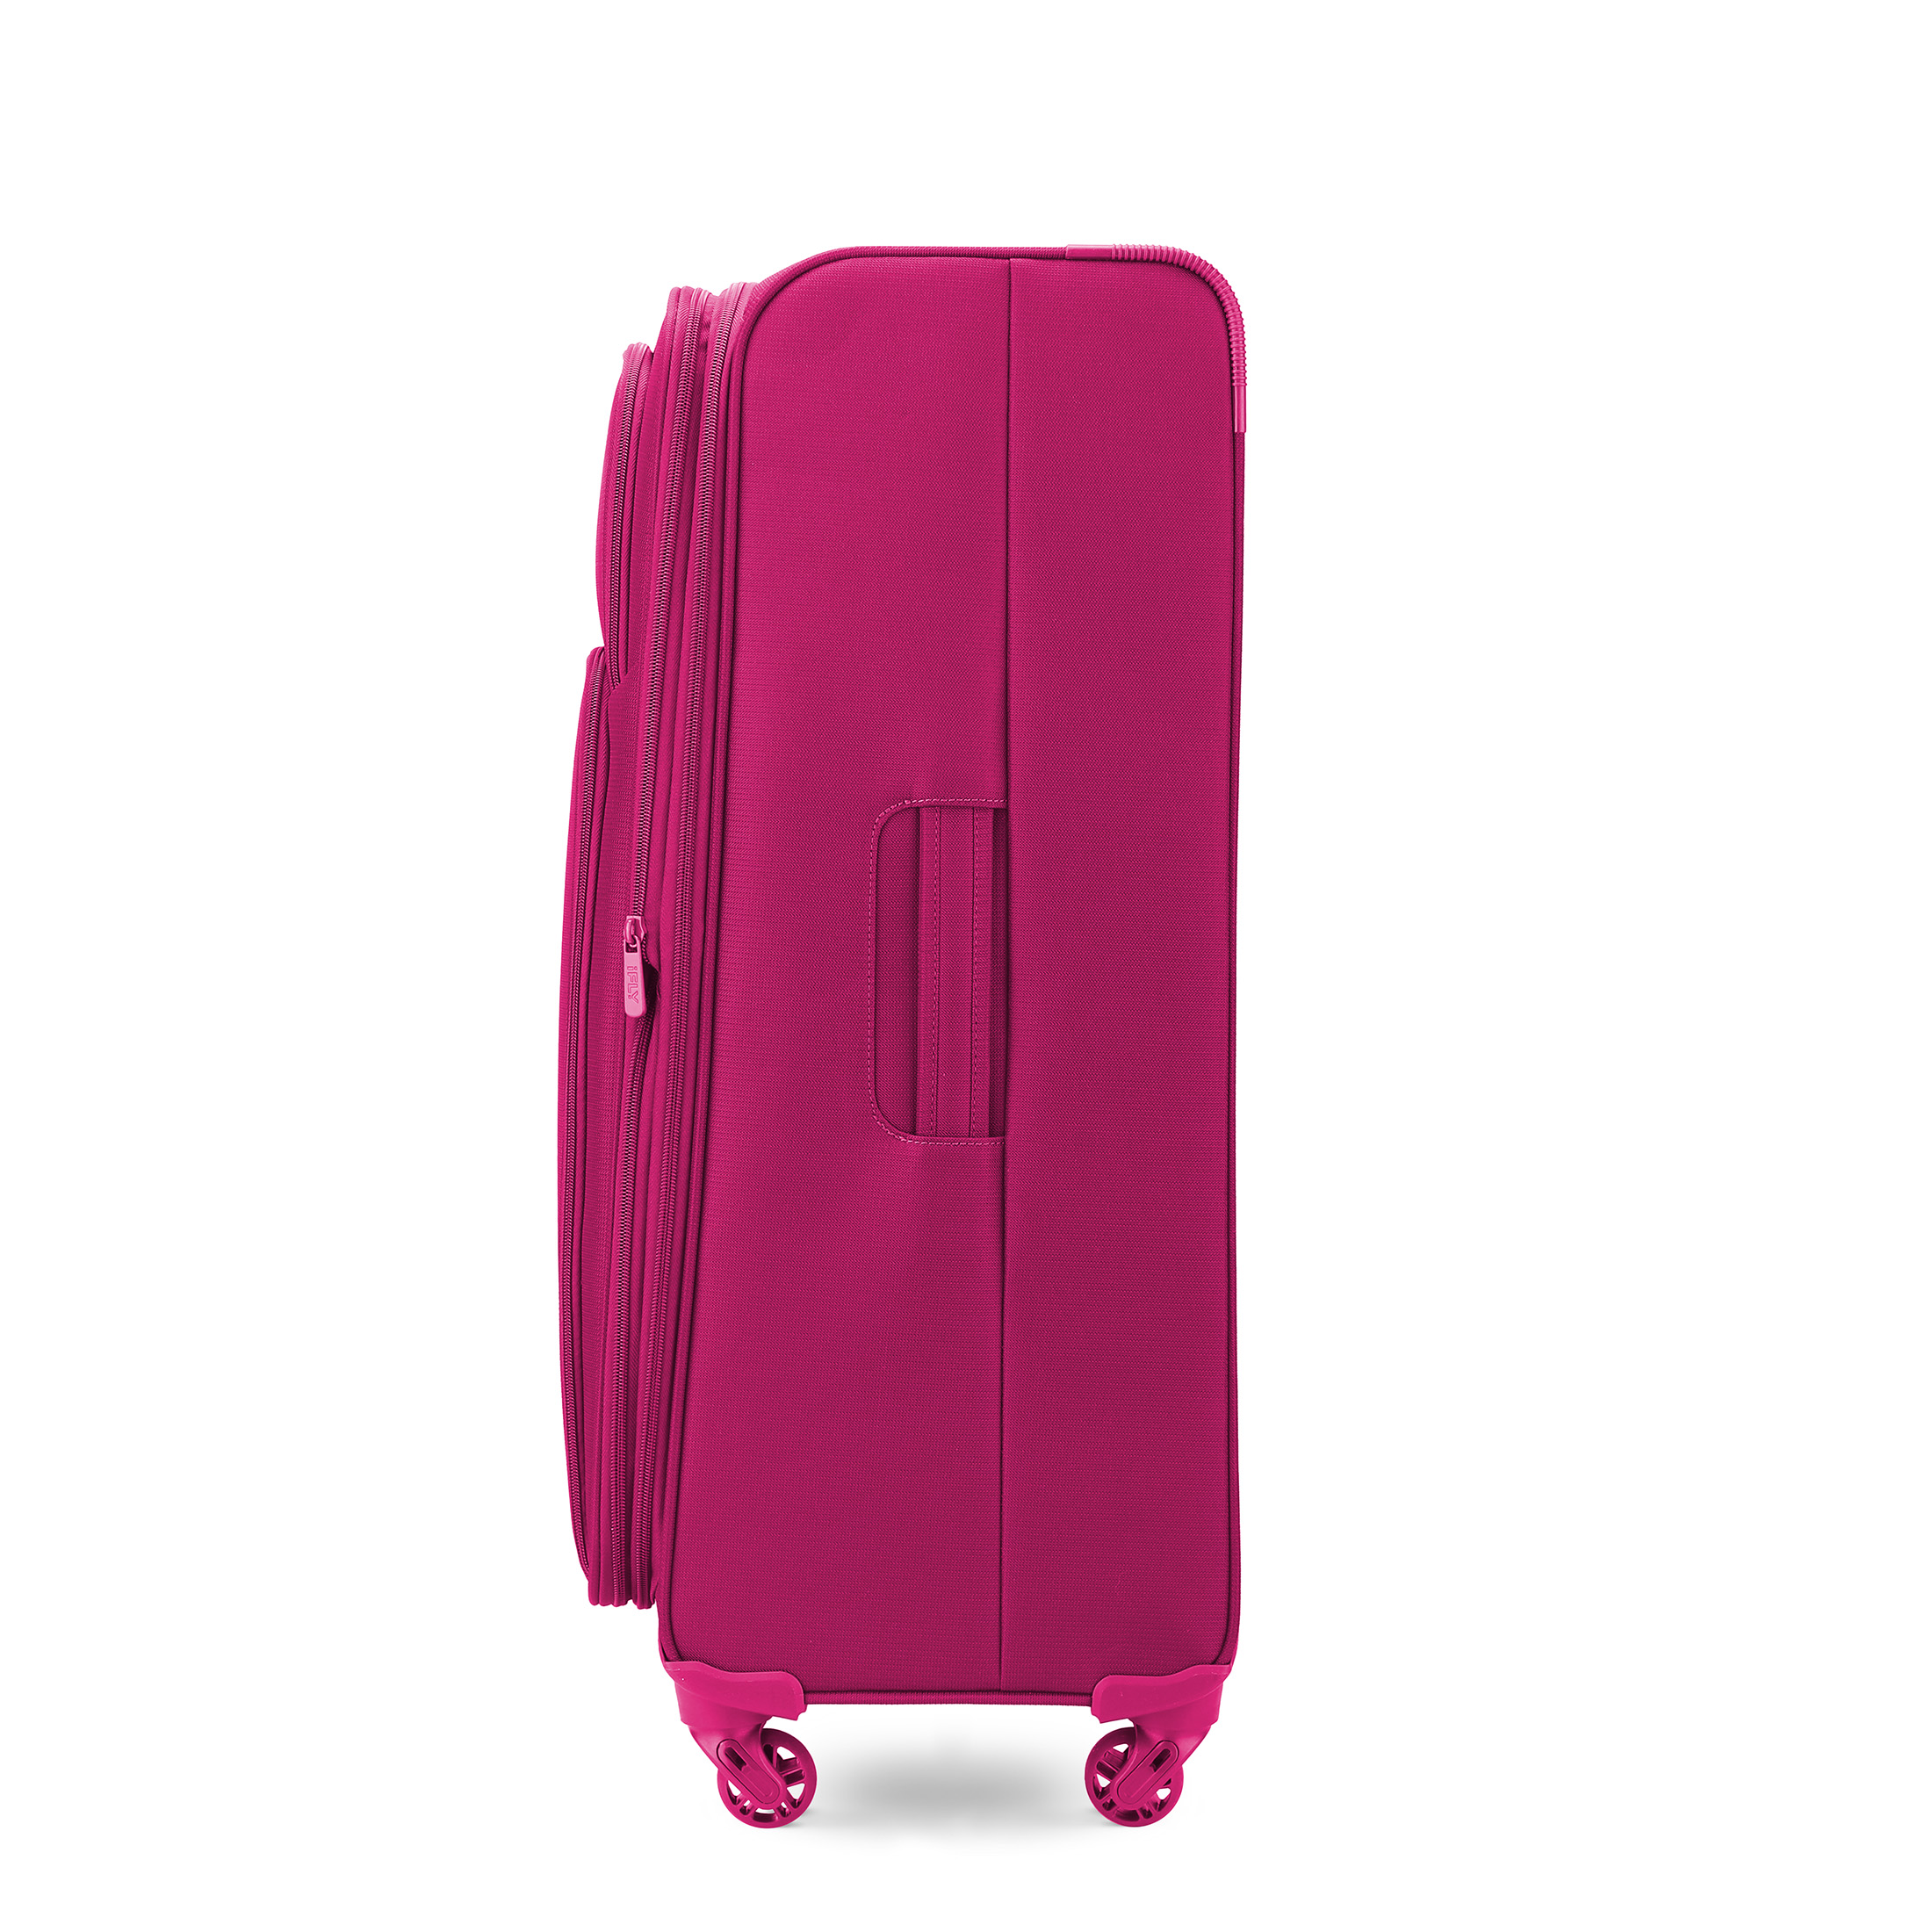 iFLY Softside Passion 24" Checked Luggage, Fuchsia - image 3 of 8